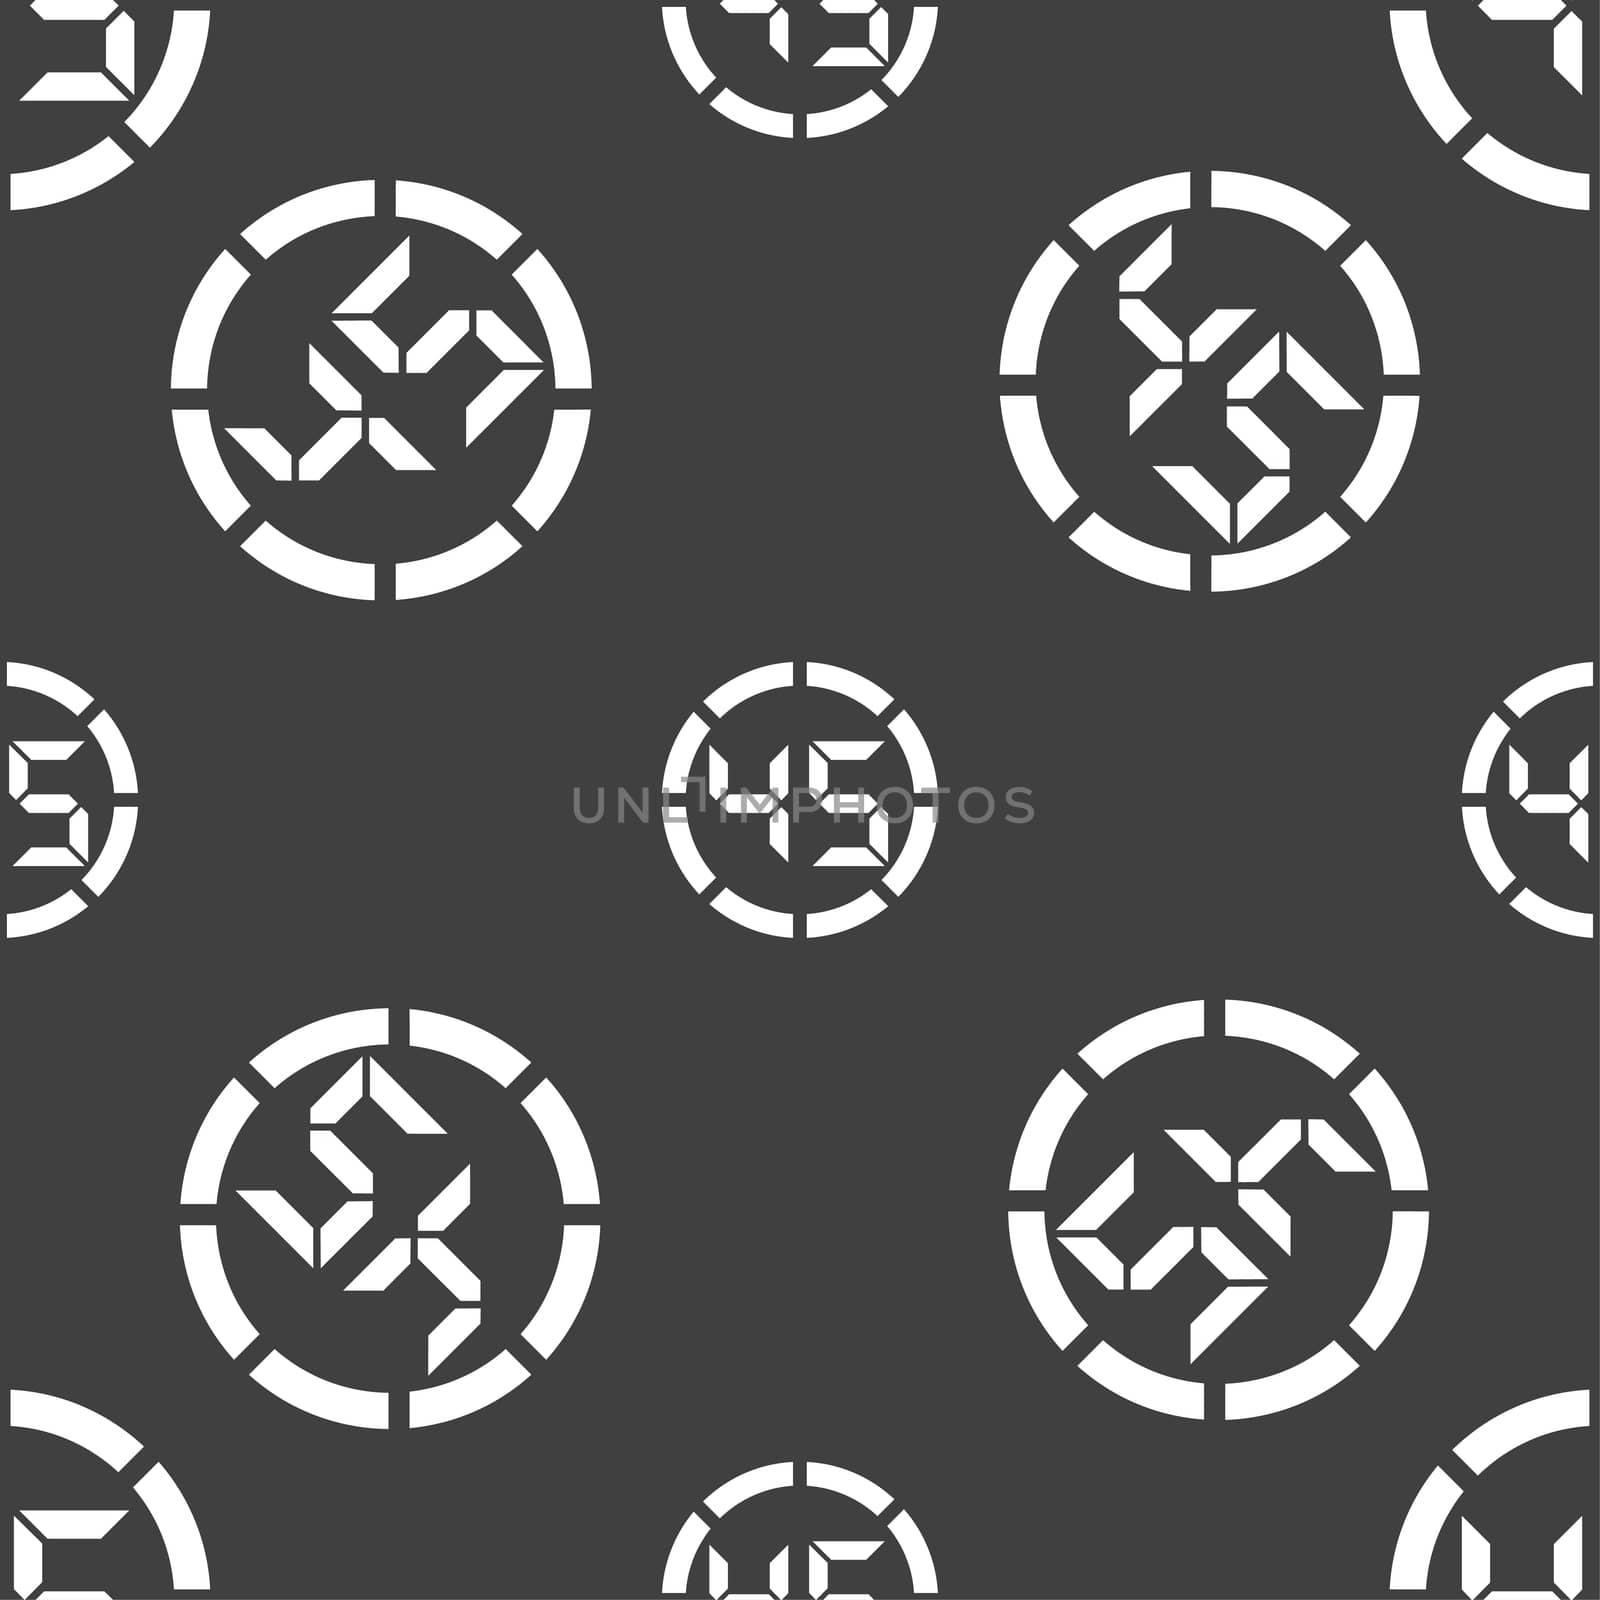 45 second stopwatch icon sign. Seamless pattern on a gray background. illustration